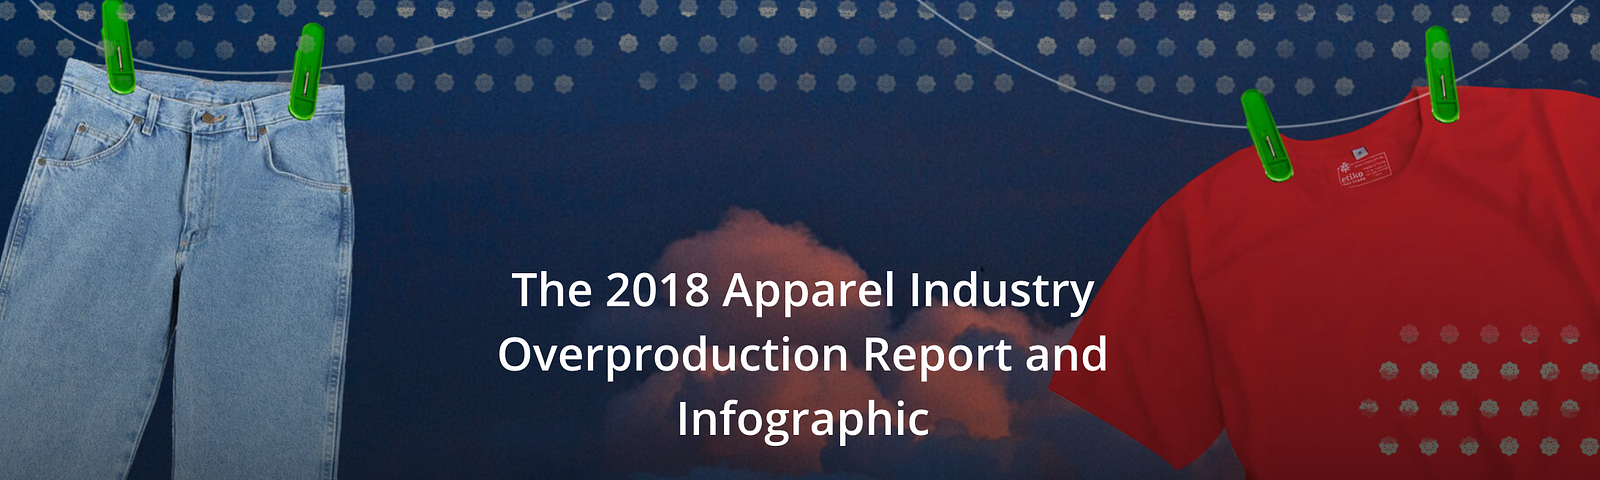 The 2018 Apparel Industry Overproduction Report and Infographic by  ShareCloth, by Nataliya, Decentralized Fashion